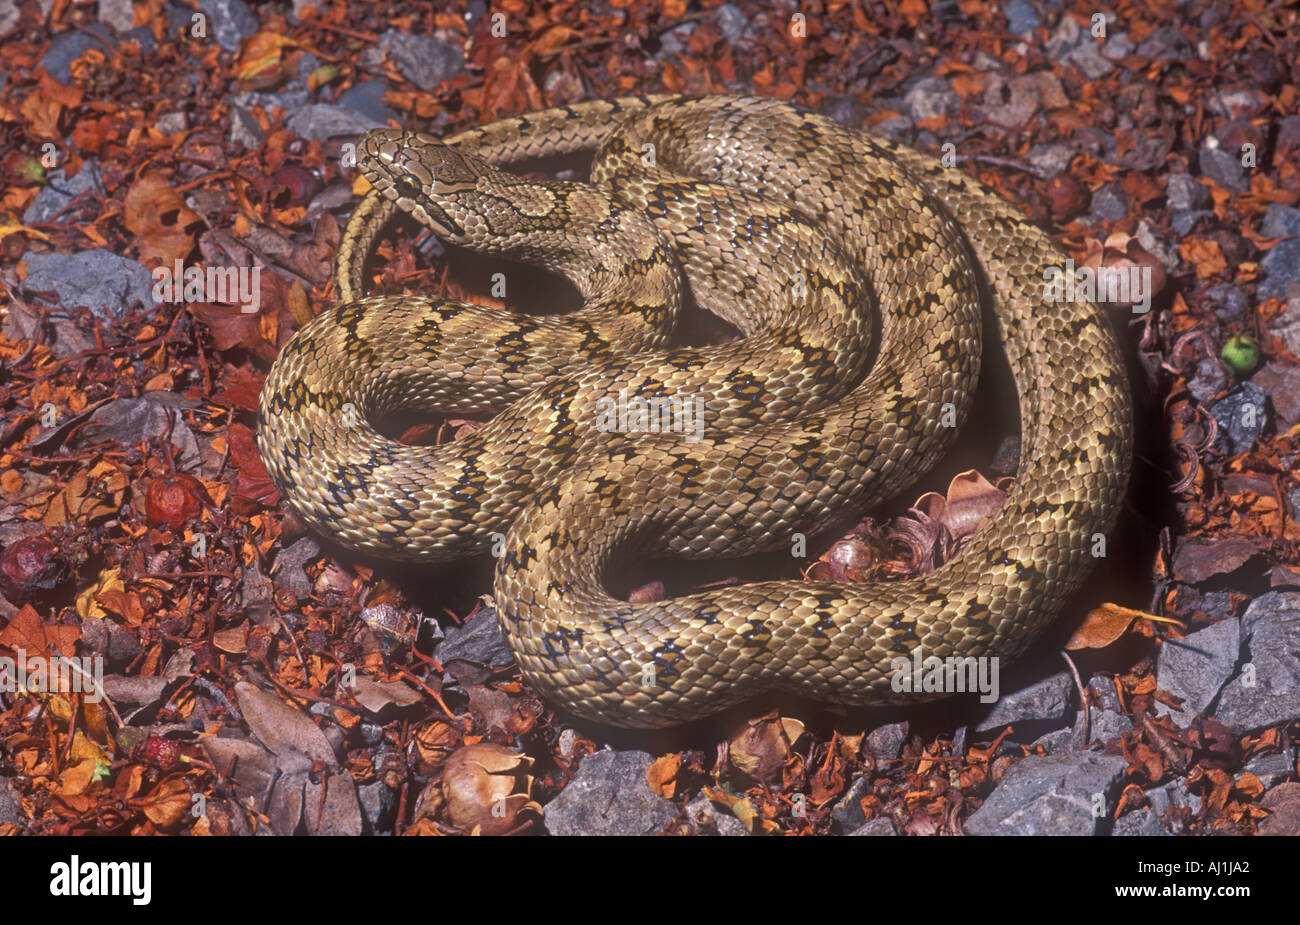 Steppe rat snake Elaphe dione Central Asia Stock Photo